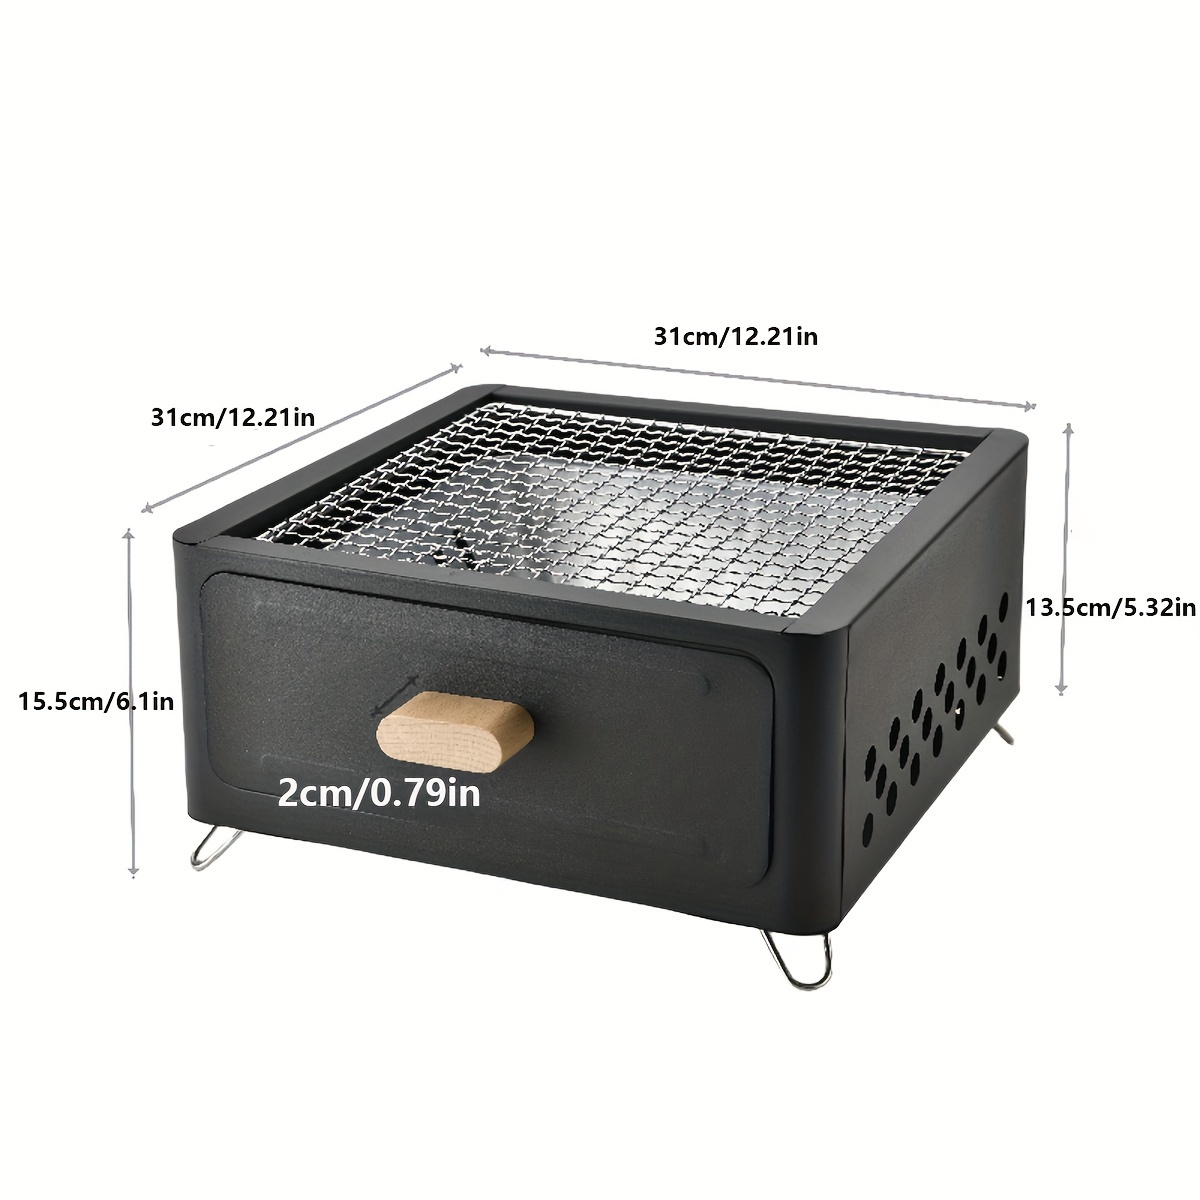 1pc Square Barbecue Grill, K-704 Grill Charcoal Stove, Portable Smokeless Stove For Outdoor Camping Travel